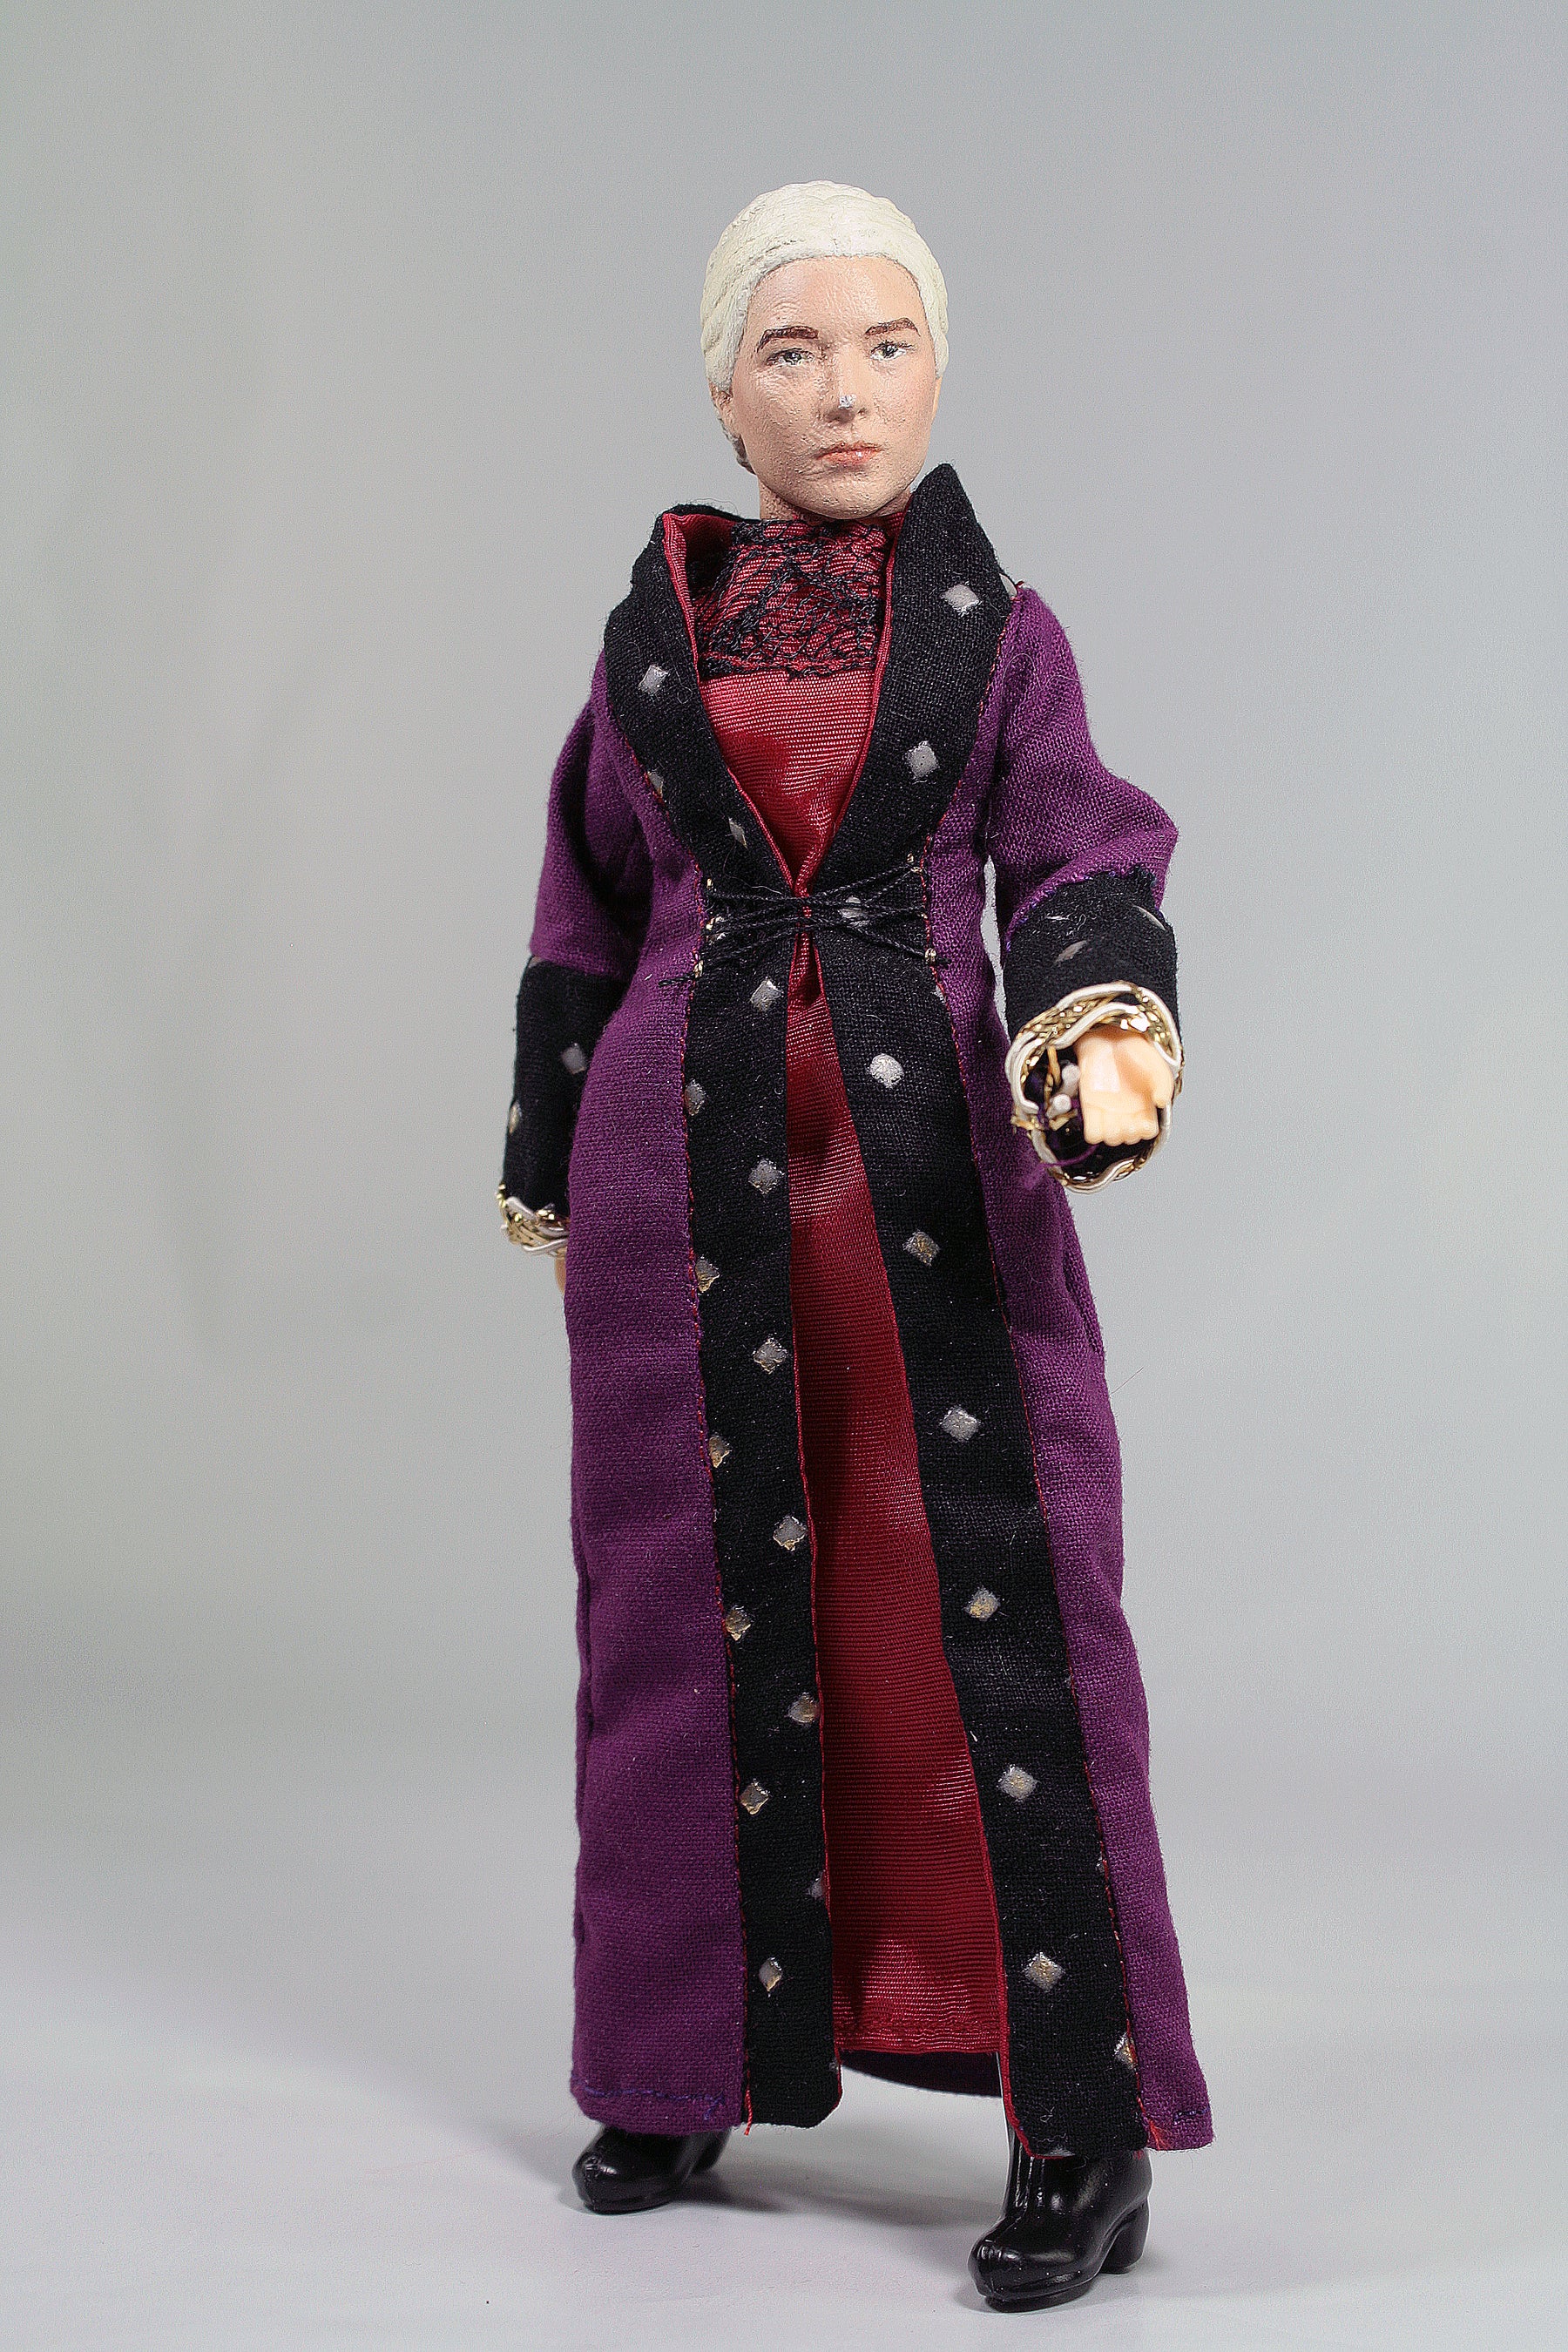 Mego Wave 18 - House of the Dragon - Rhaenyra Targaryen 8" Action Figure (Pre-Order Release Date To Be Determined)